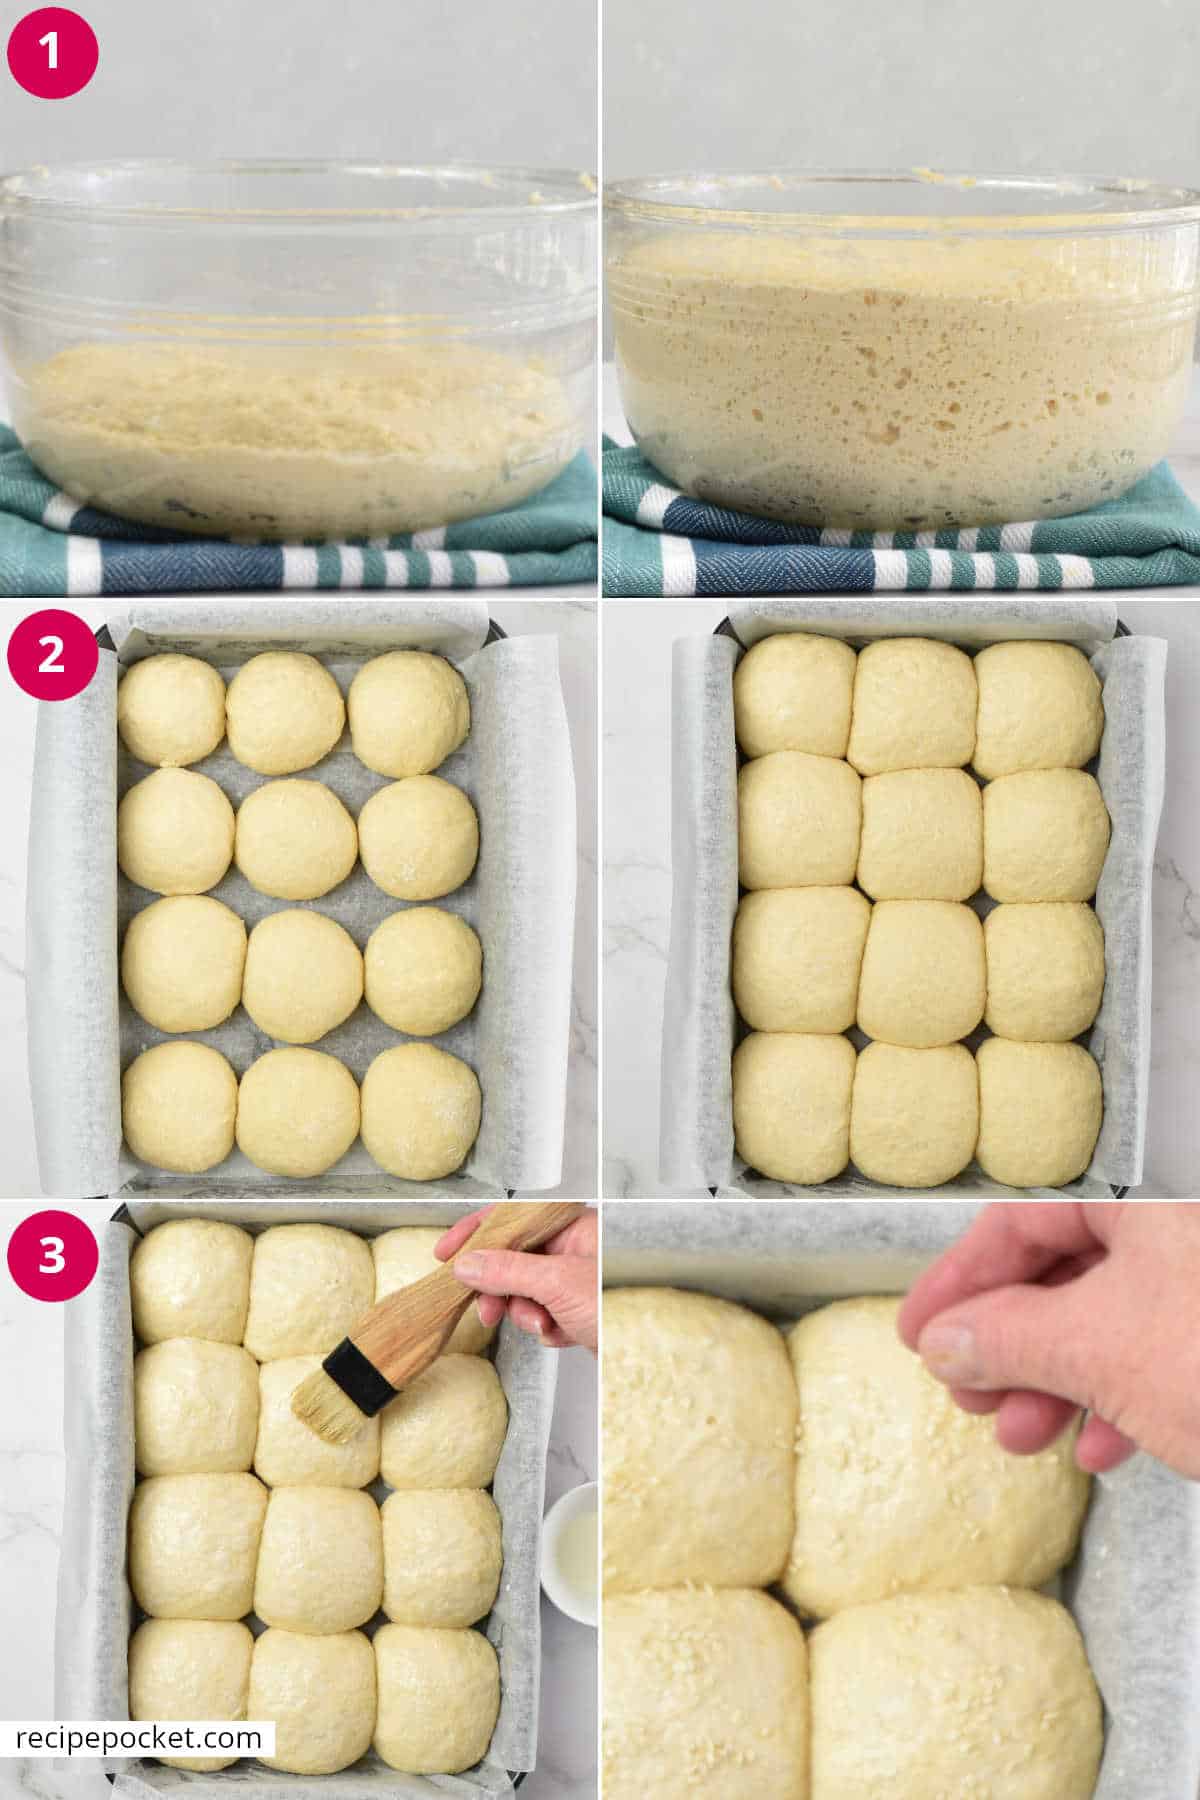 Image collage showing bread dough in a bowl, dough shaped in to balls and dough balls being brushed with milk.